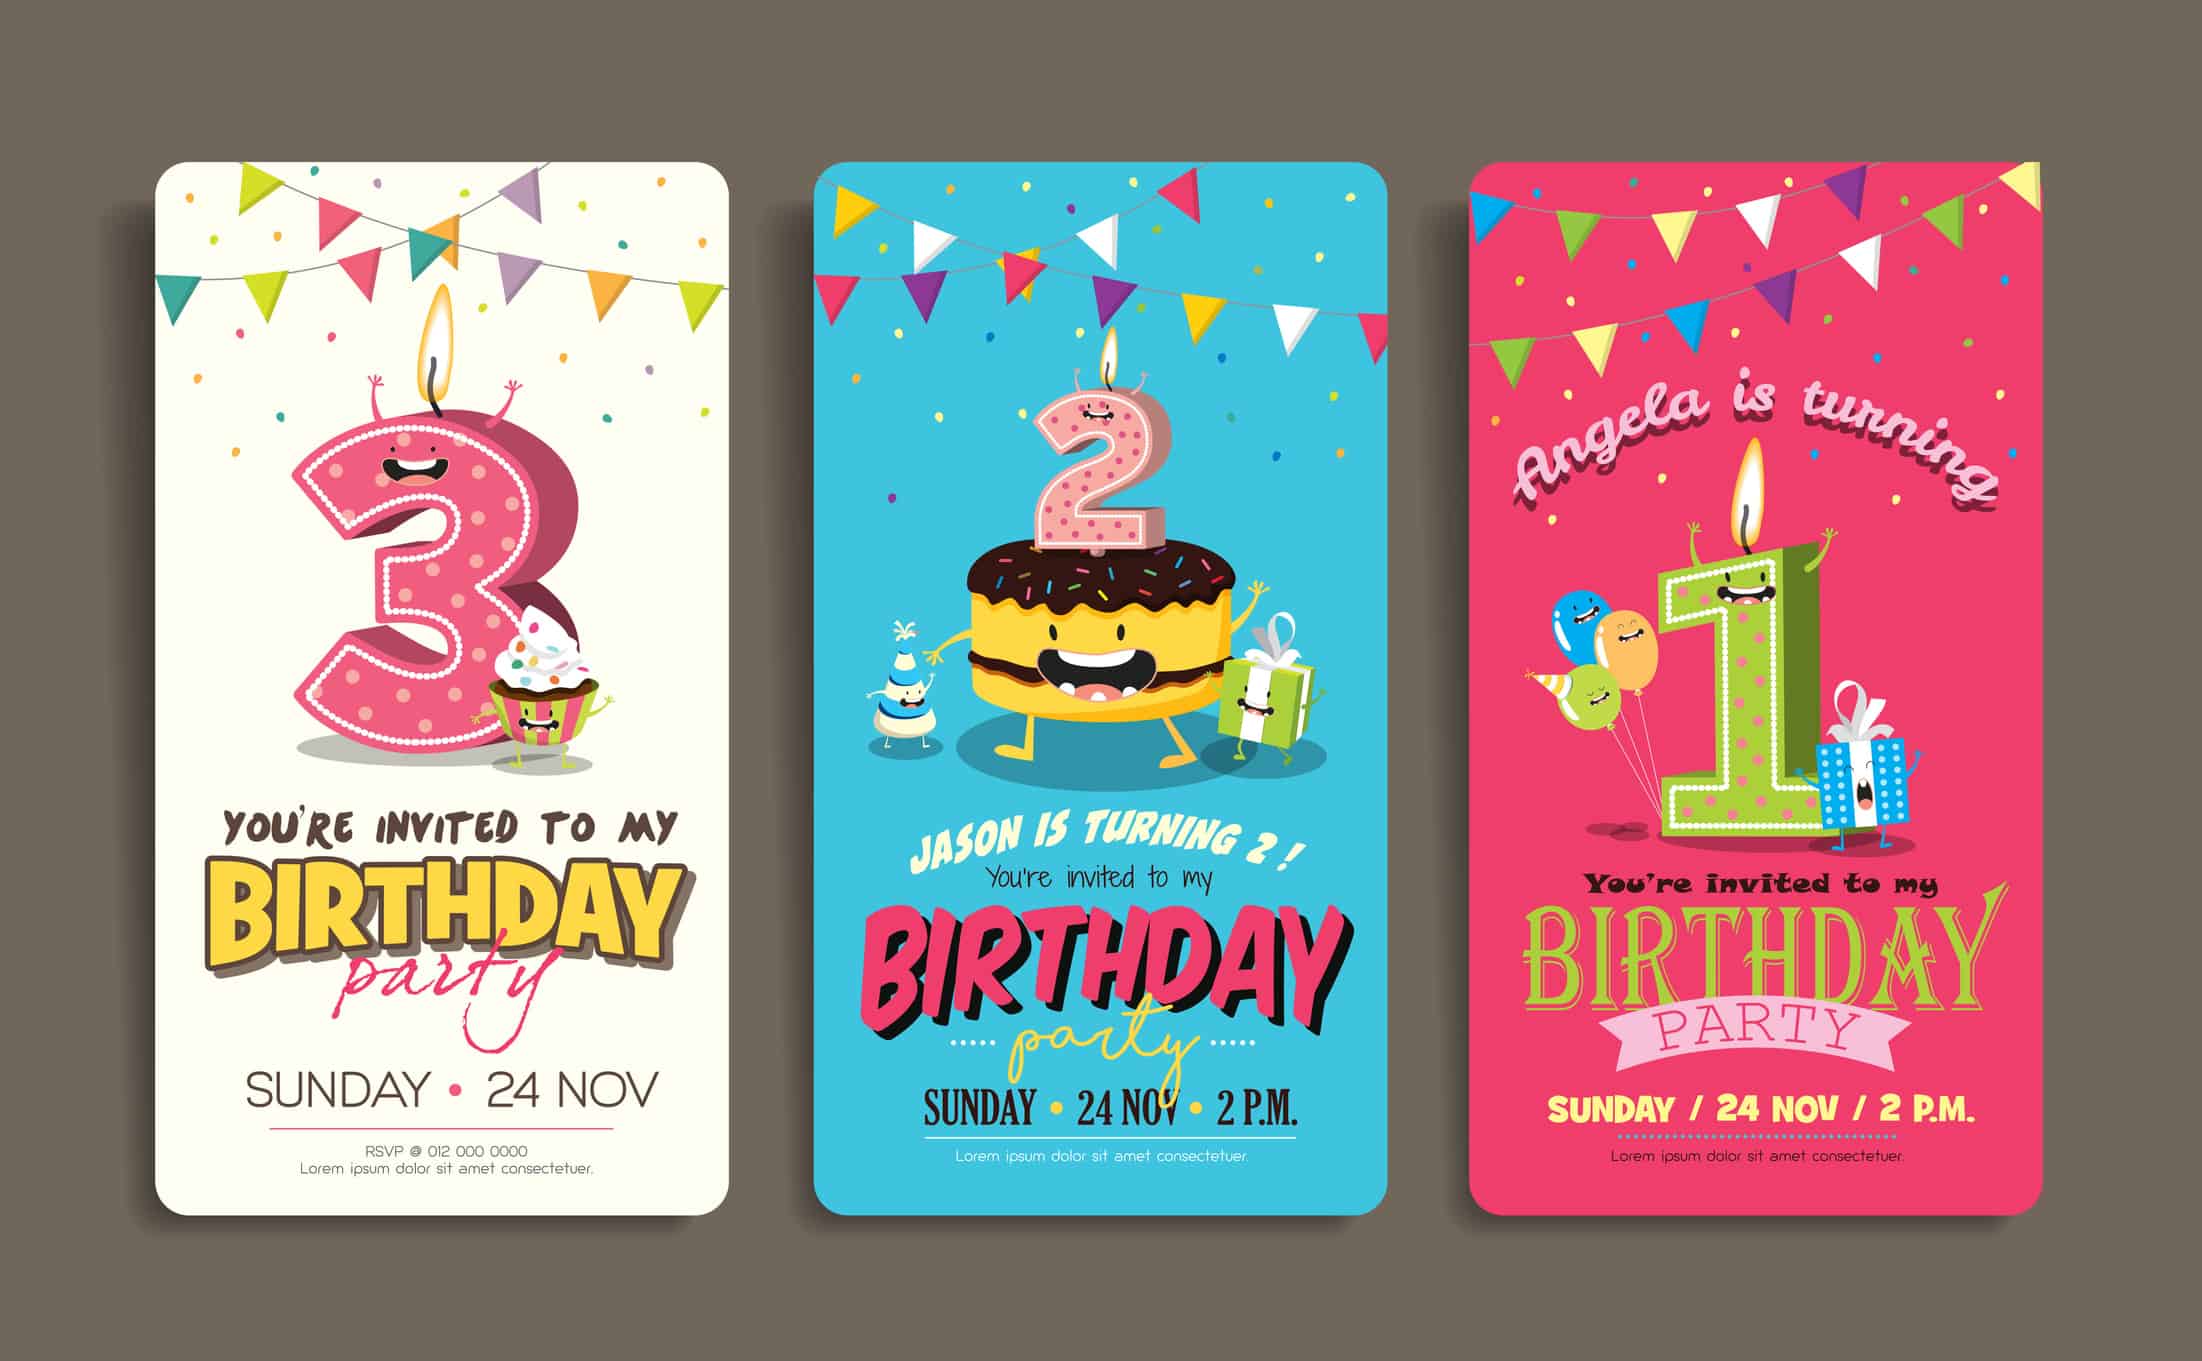 Birthday Anniversary Numbers Candle with Funny Character & Birthday Party Invitation Card Template